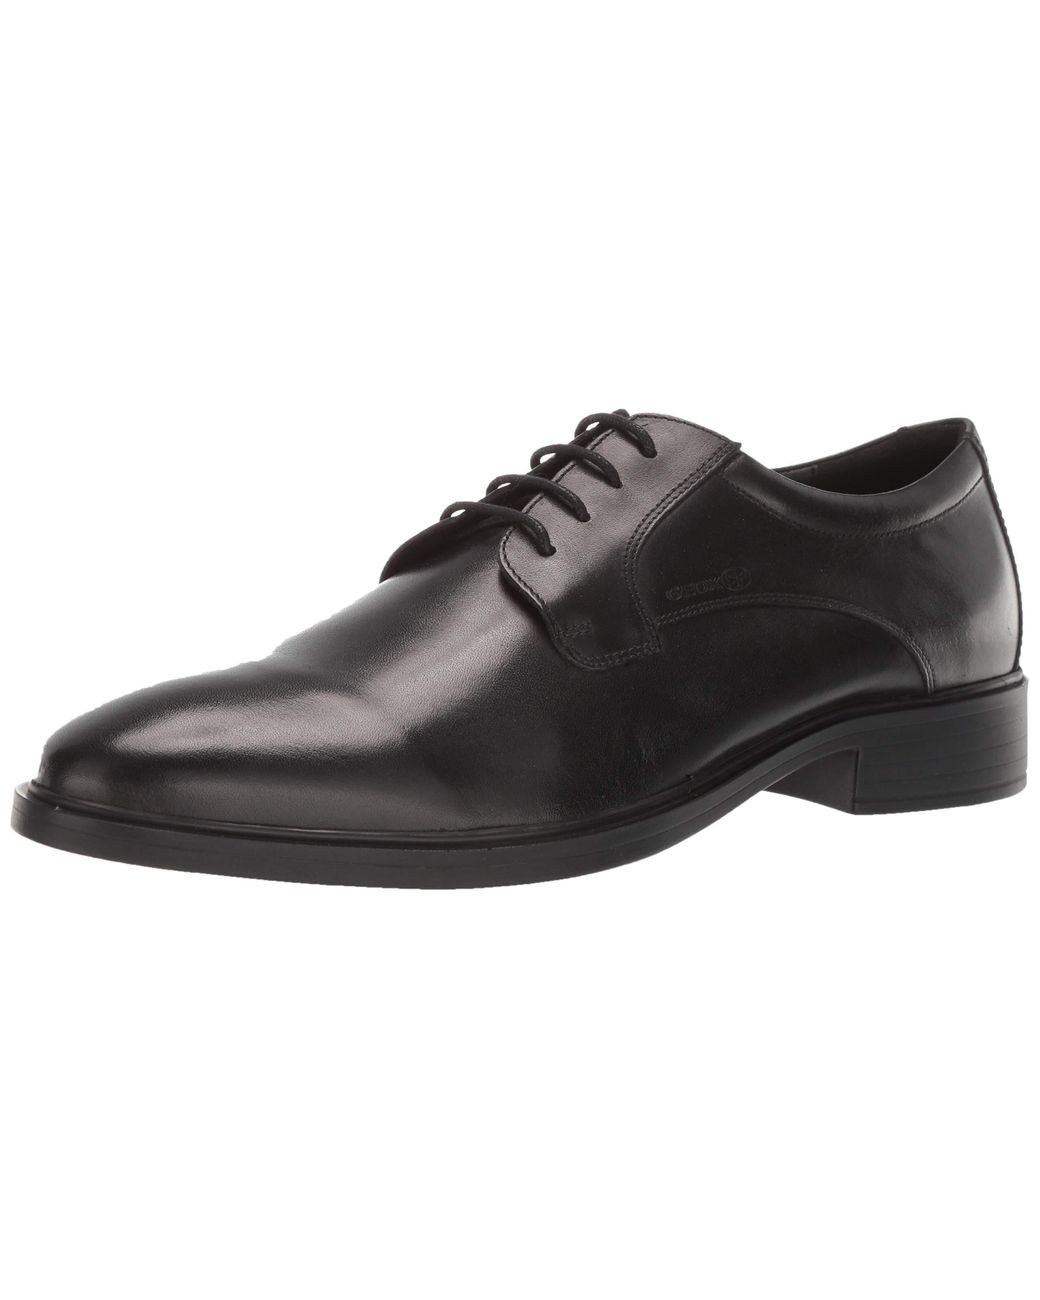 Geox Gladwin 1 Dress Shoe Oxford in Black for Men - Save 31% - Lyst